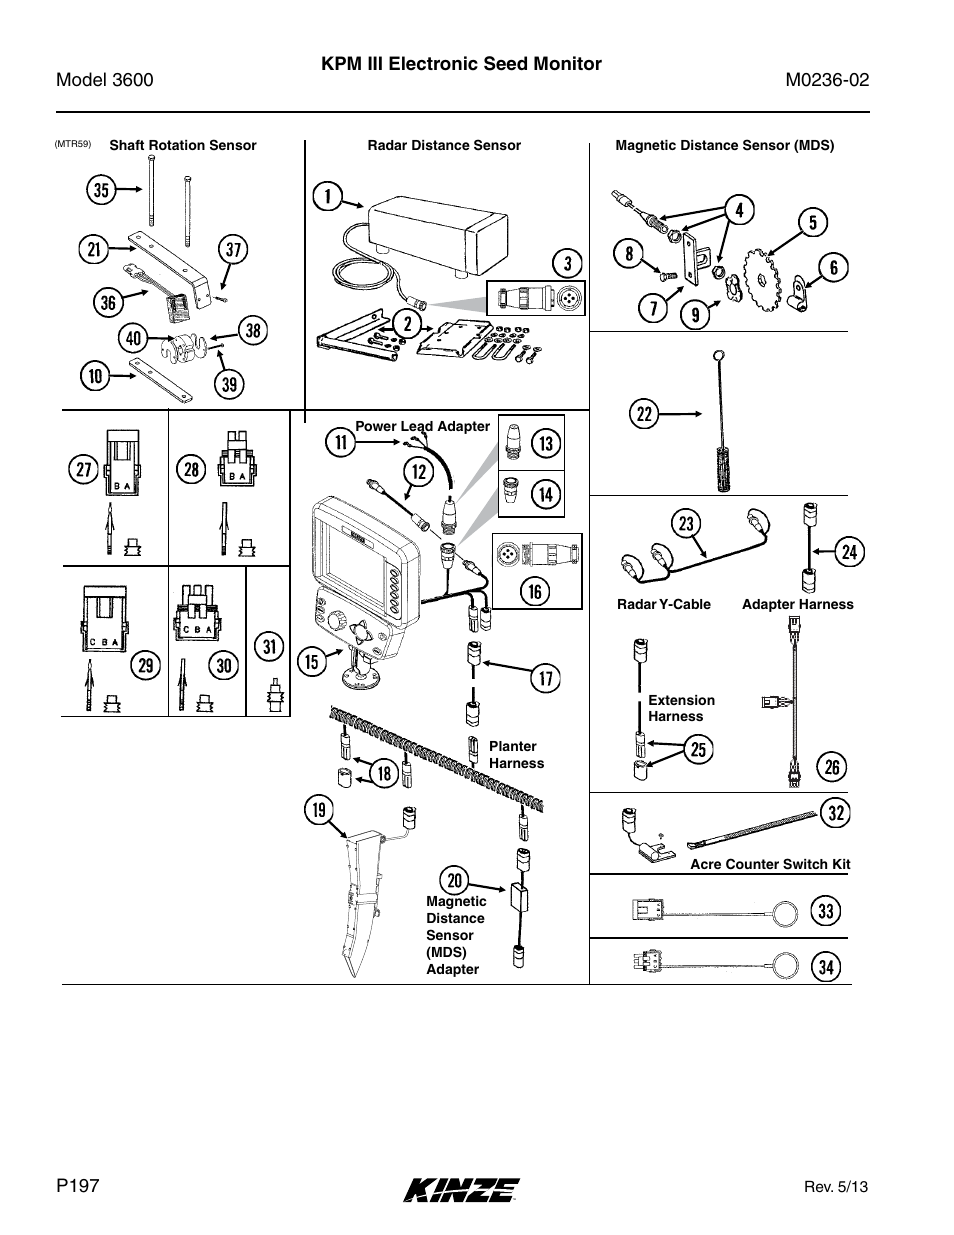 Kpm iii electronic seed monitor | Kinze 3600 Lift and Rotate Planter Rev. 5/14 User Manual | Page 200 / 302